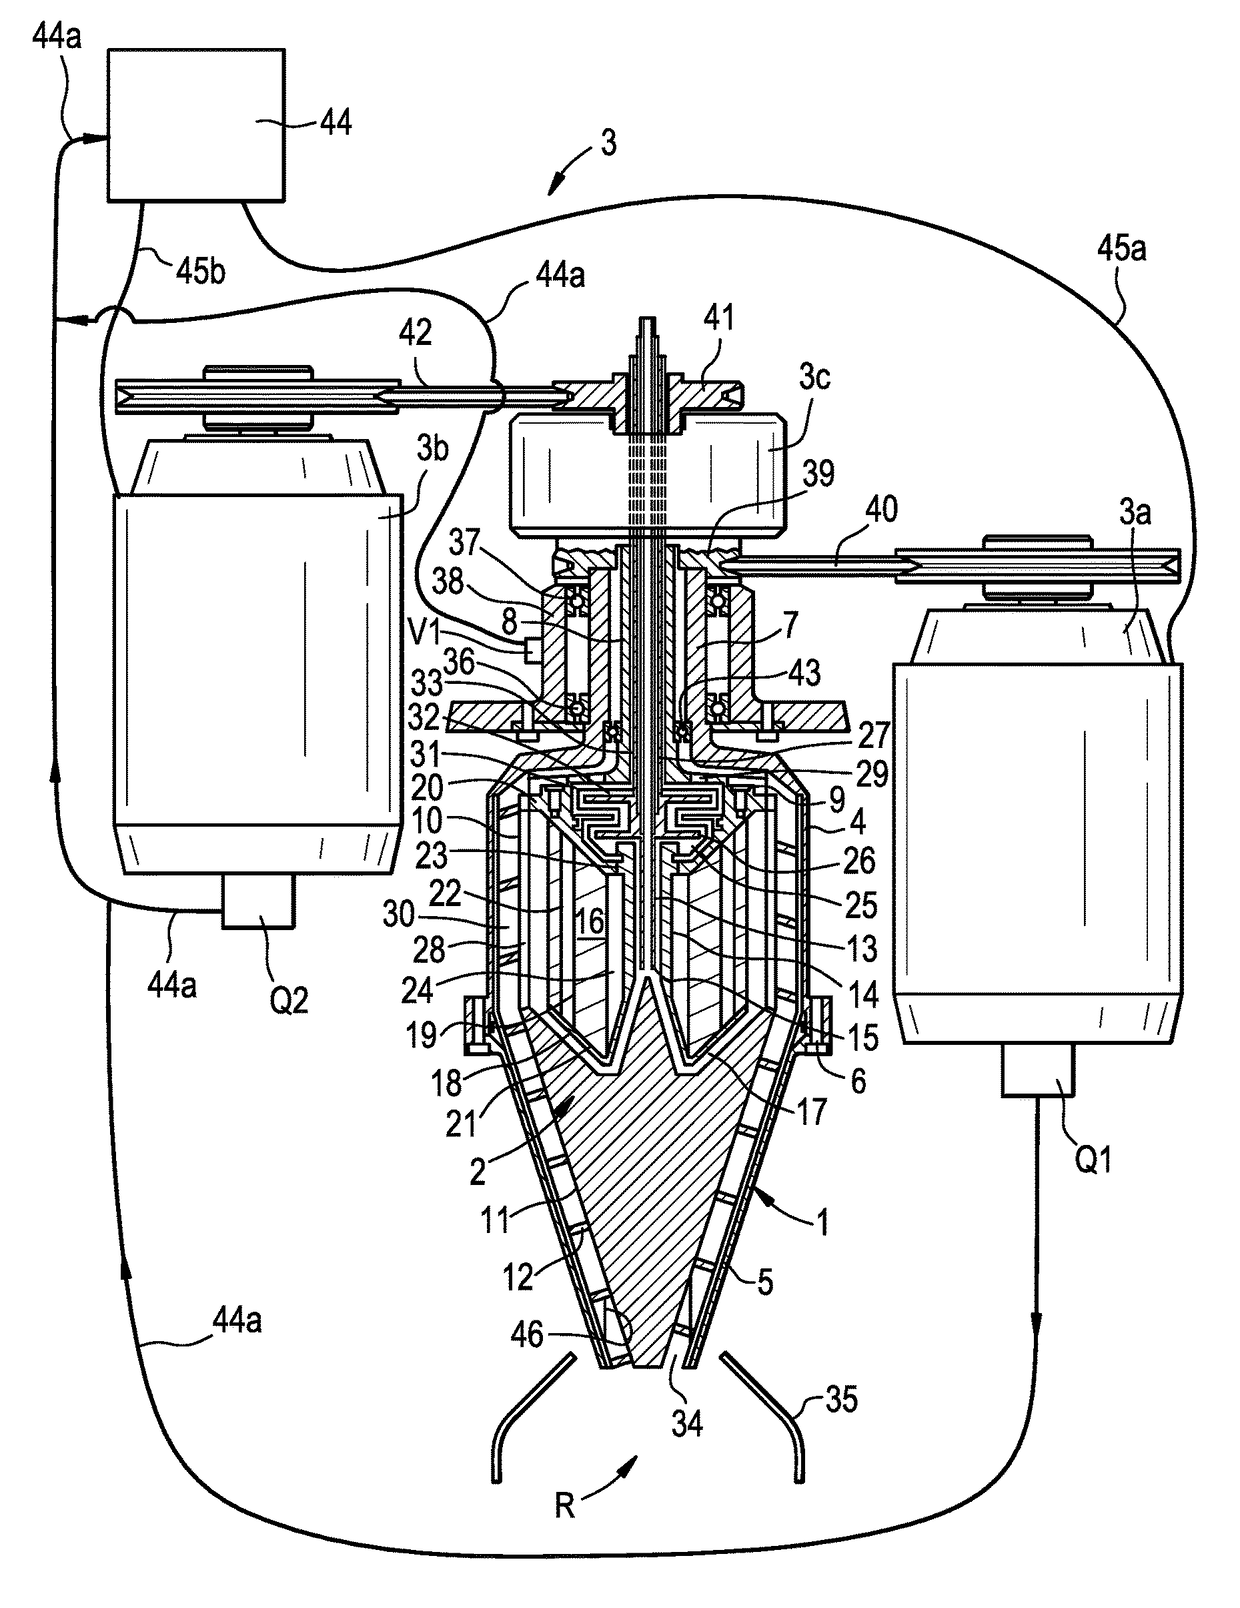 Centrifugal separator with a control unit for speed control